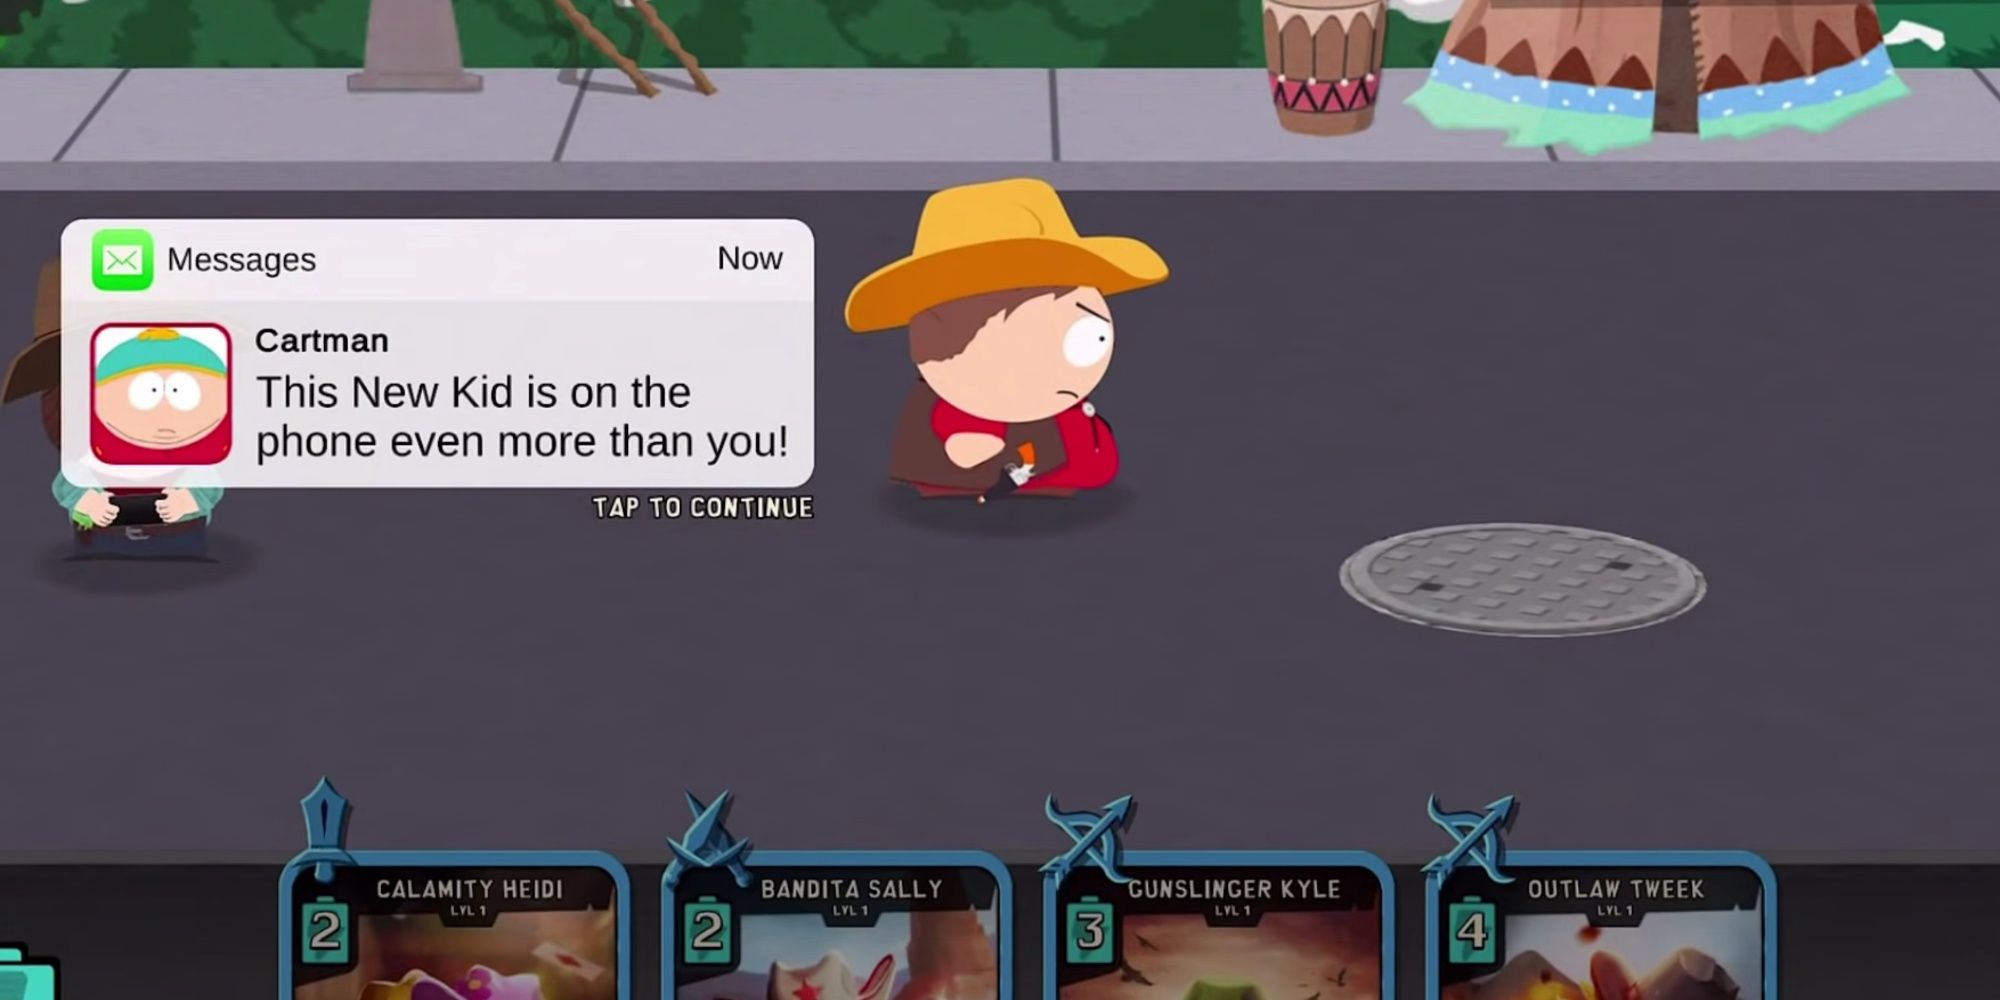 A screenshot from the tutorial stage of Phone Destroyer, with Cartman dressed a a sheriff and a text message popping up on the screen from him.